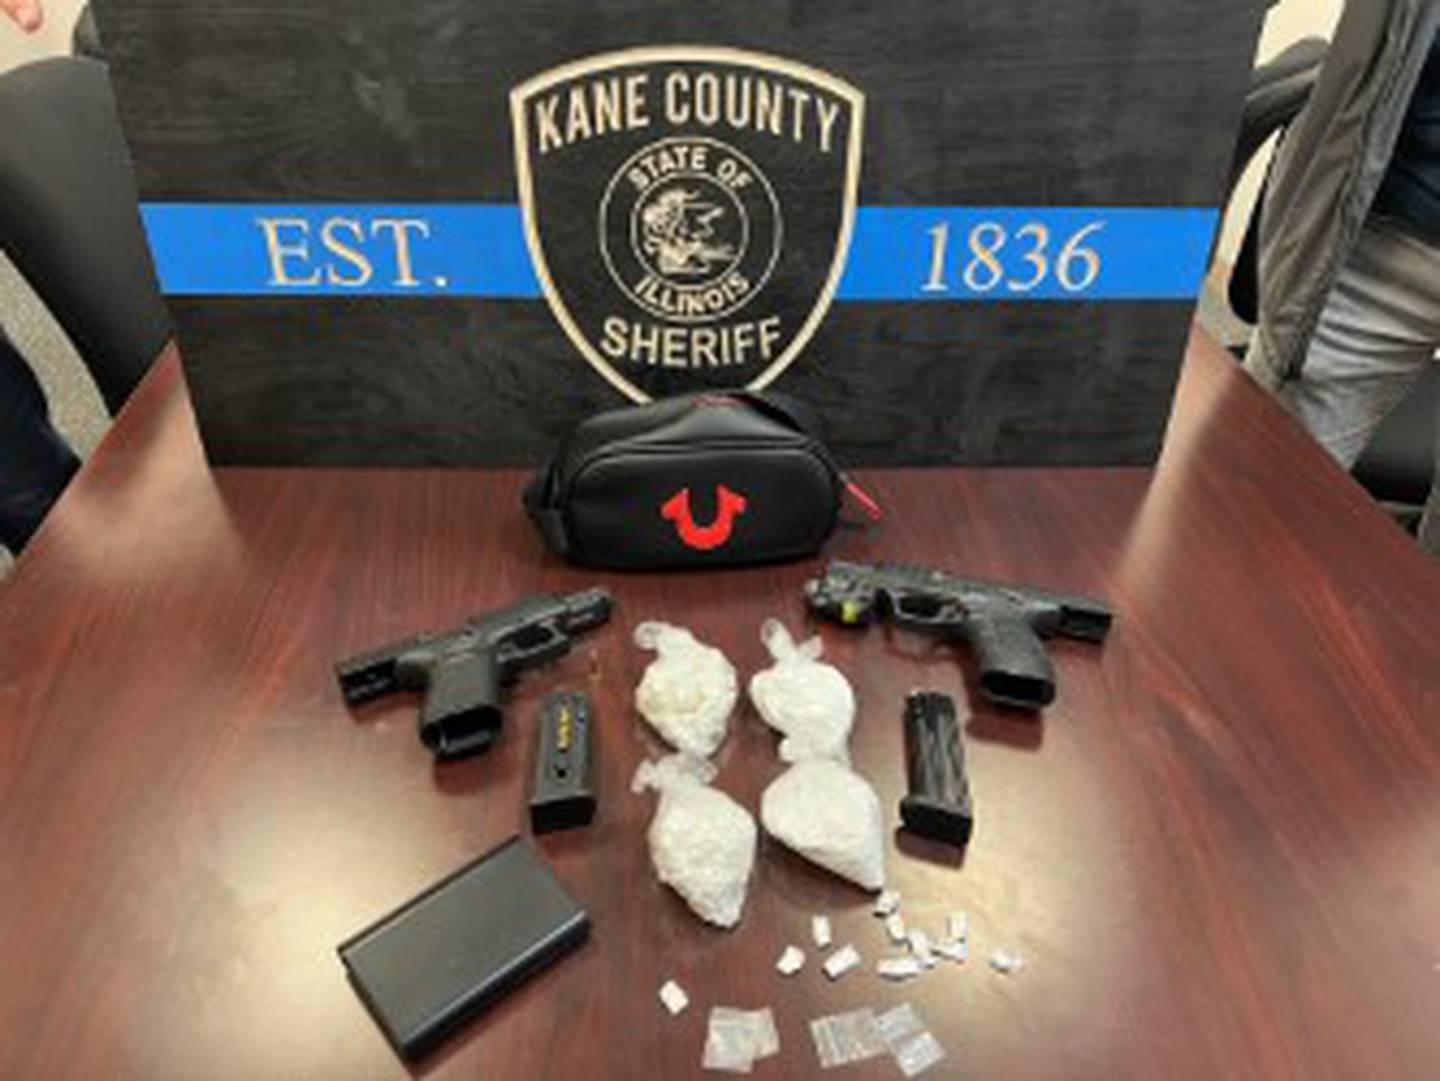 The Kane County Criminal Interdiction Team recovered two guns and drugs Jan. 15 in a traffic stop in Rutland Township, resulting in the arrest of Aaron M. Mitchell, 28, of Wisconsin.